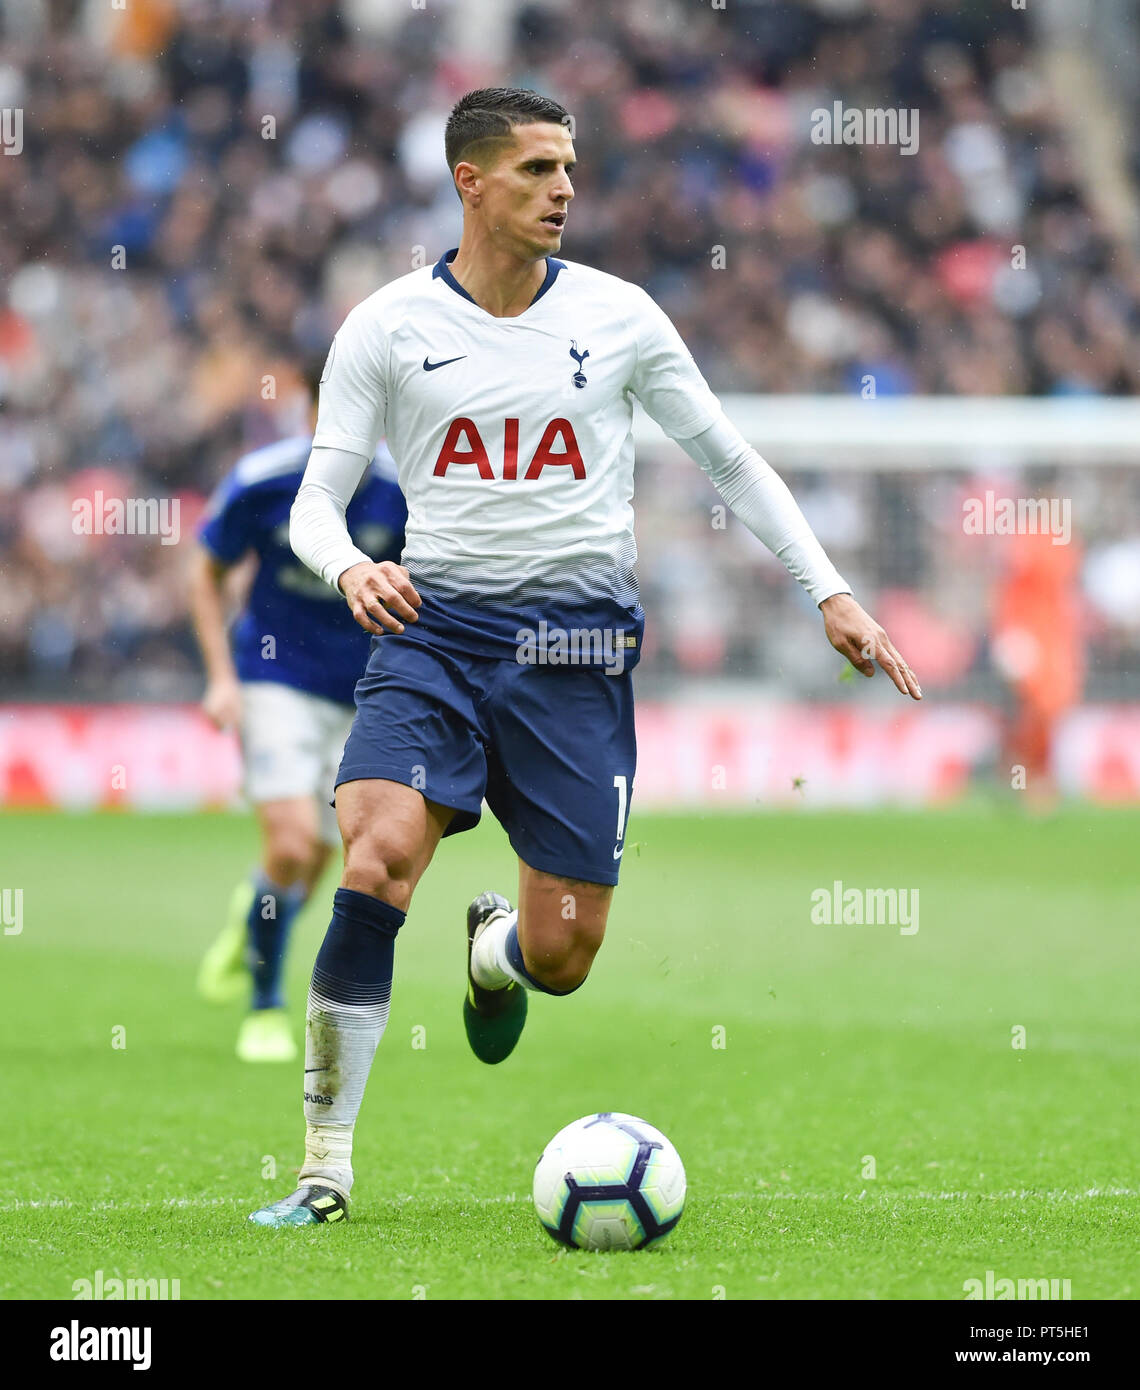 Erik Lamela of Spurs during the Premier League match between Tottenham Hotspur and Cardiff City at Wembley Stadium , London , 06 October 2018  Editorial use only. No merchandising. For Football images FA and Premier League restrictions apply inc. no internet/mobile usage without FAPL license - for details contact Football Dataco Stock Photo